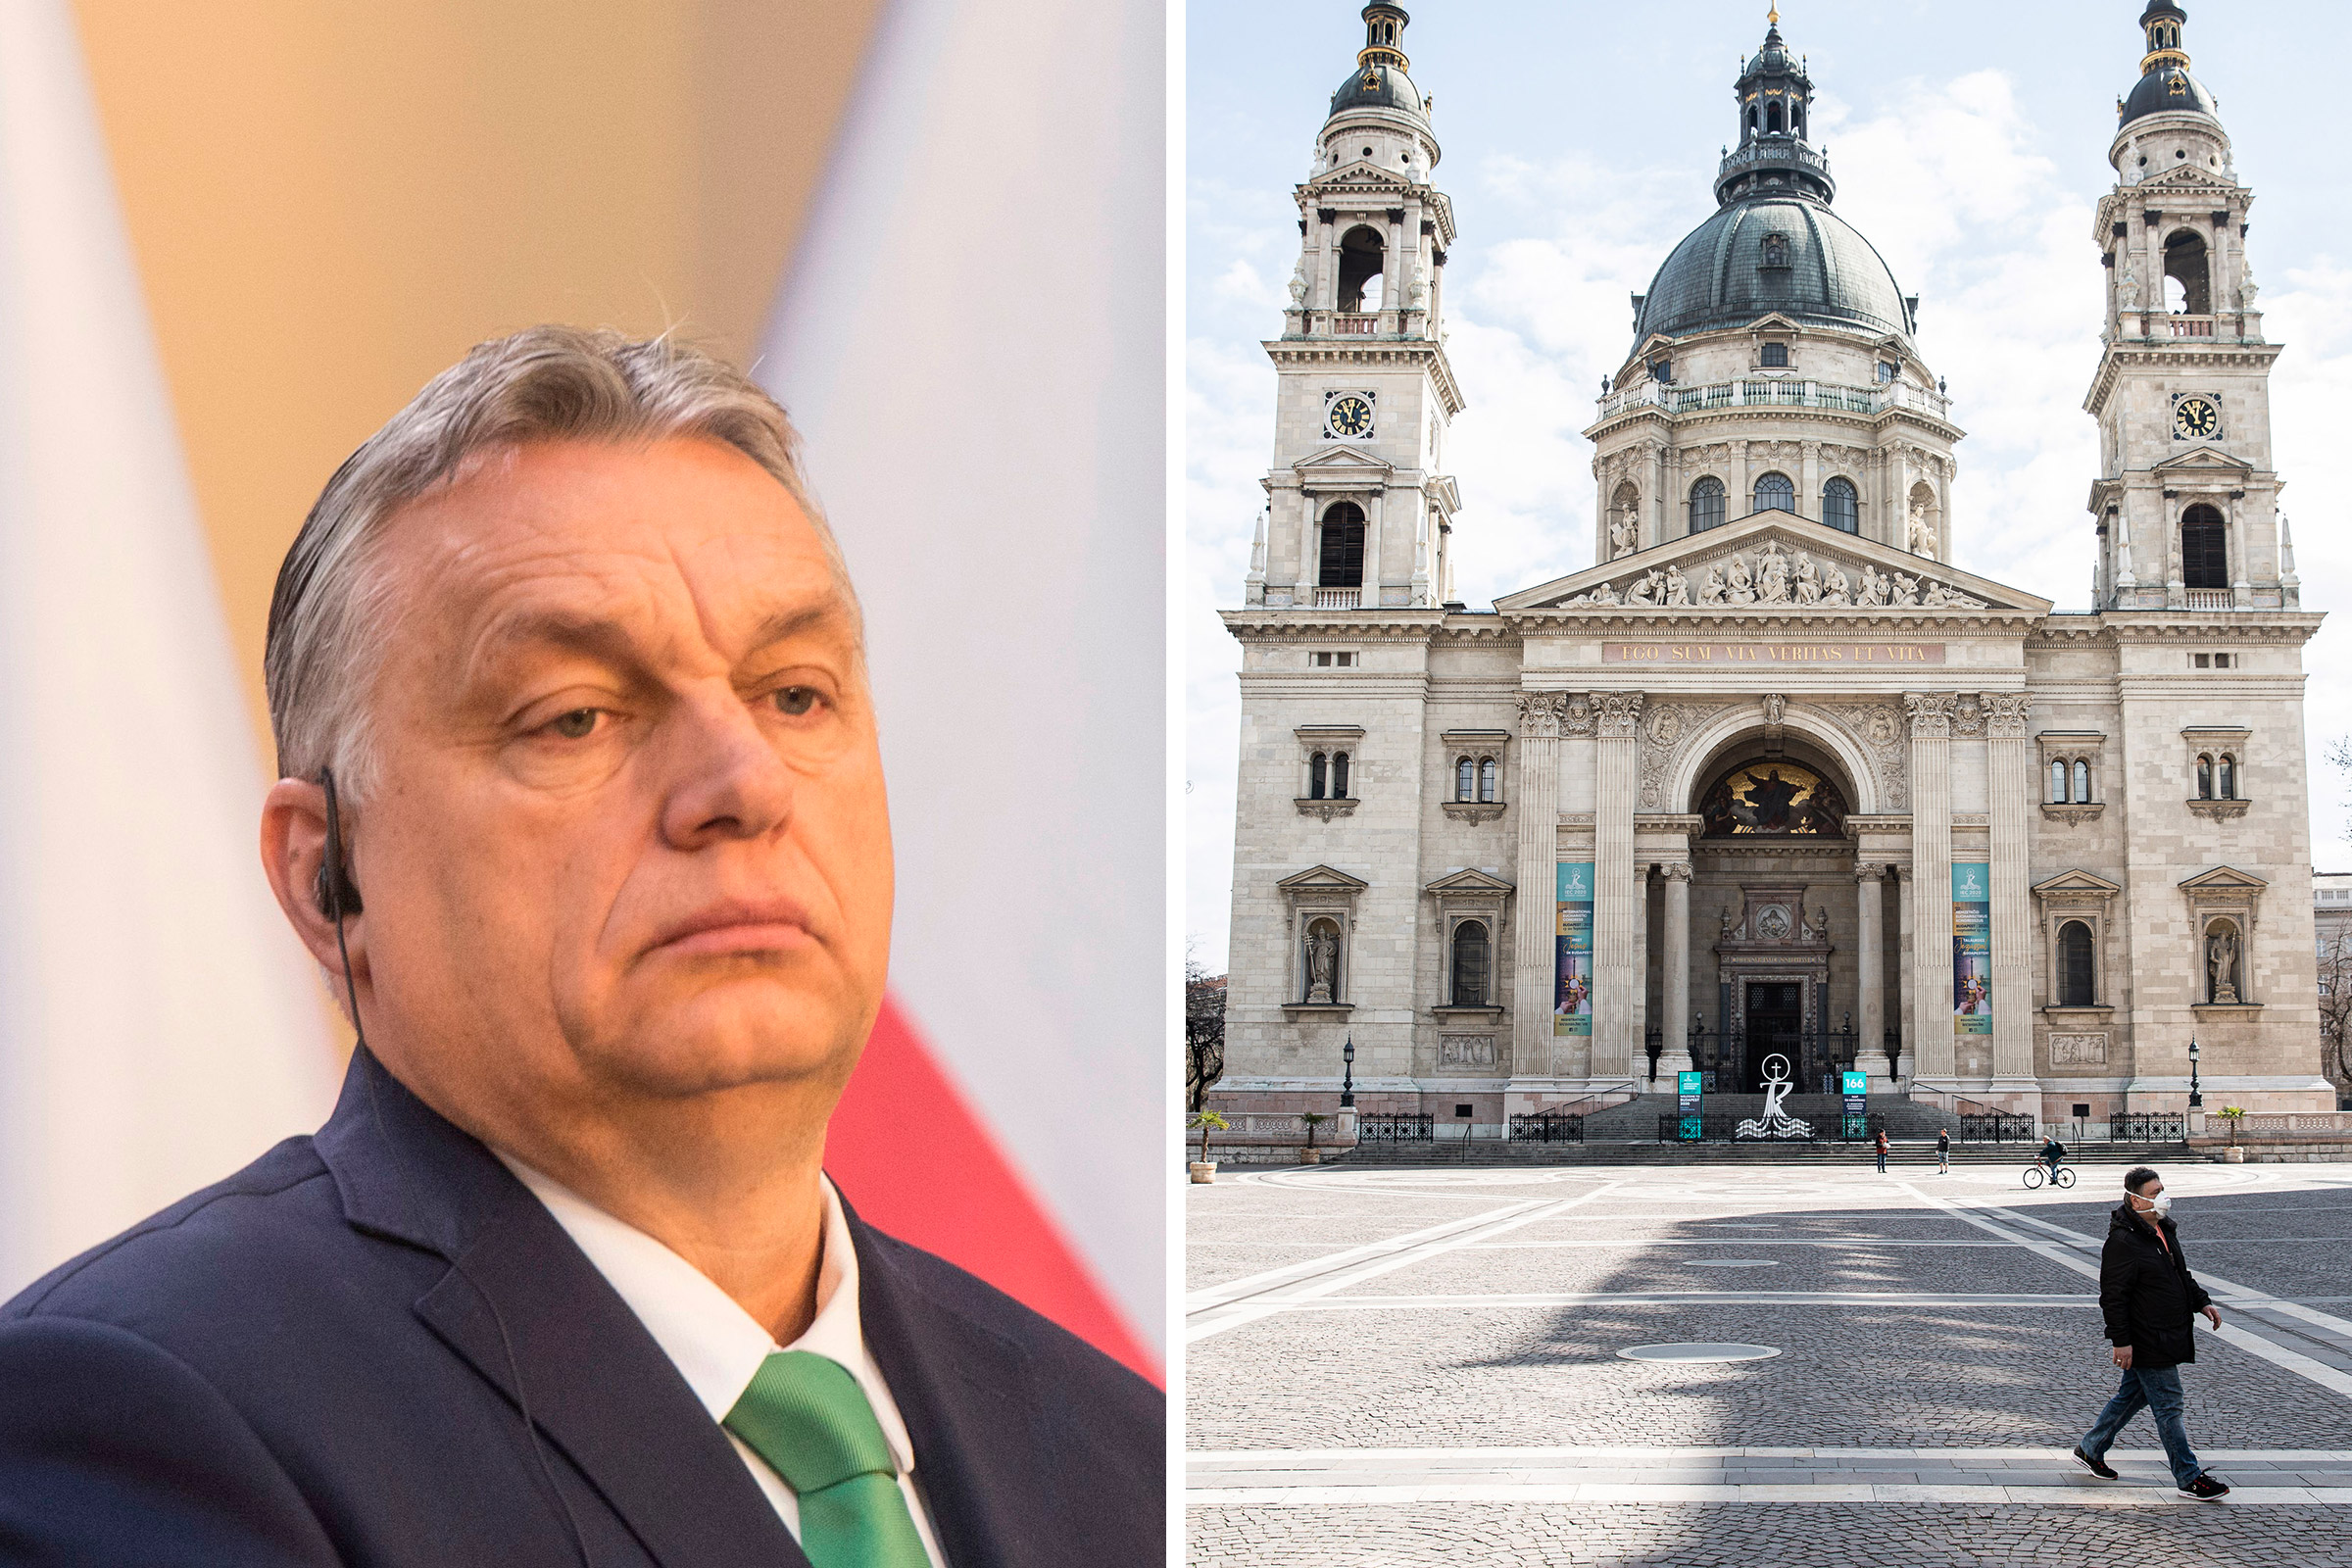 Hungary's Prime Minister Viktor Orban gives a joint press conference on March 4; A pedestrian wearing a protective face mask walks across a deserted square outside St. Stephen's Basilica in Budapest, Hungary on March 31 (Michal Cizek—AFP/Getty Images; Akos Stiller—Bloomberg/Getty Images)